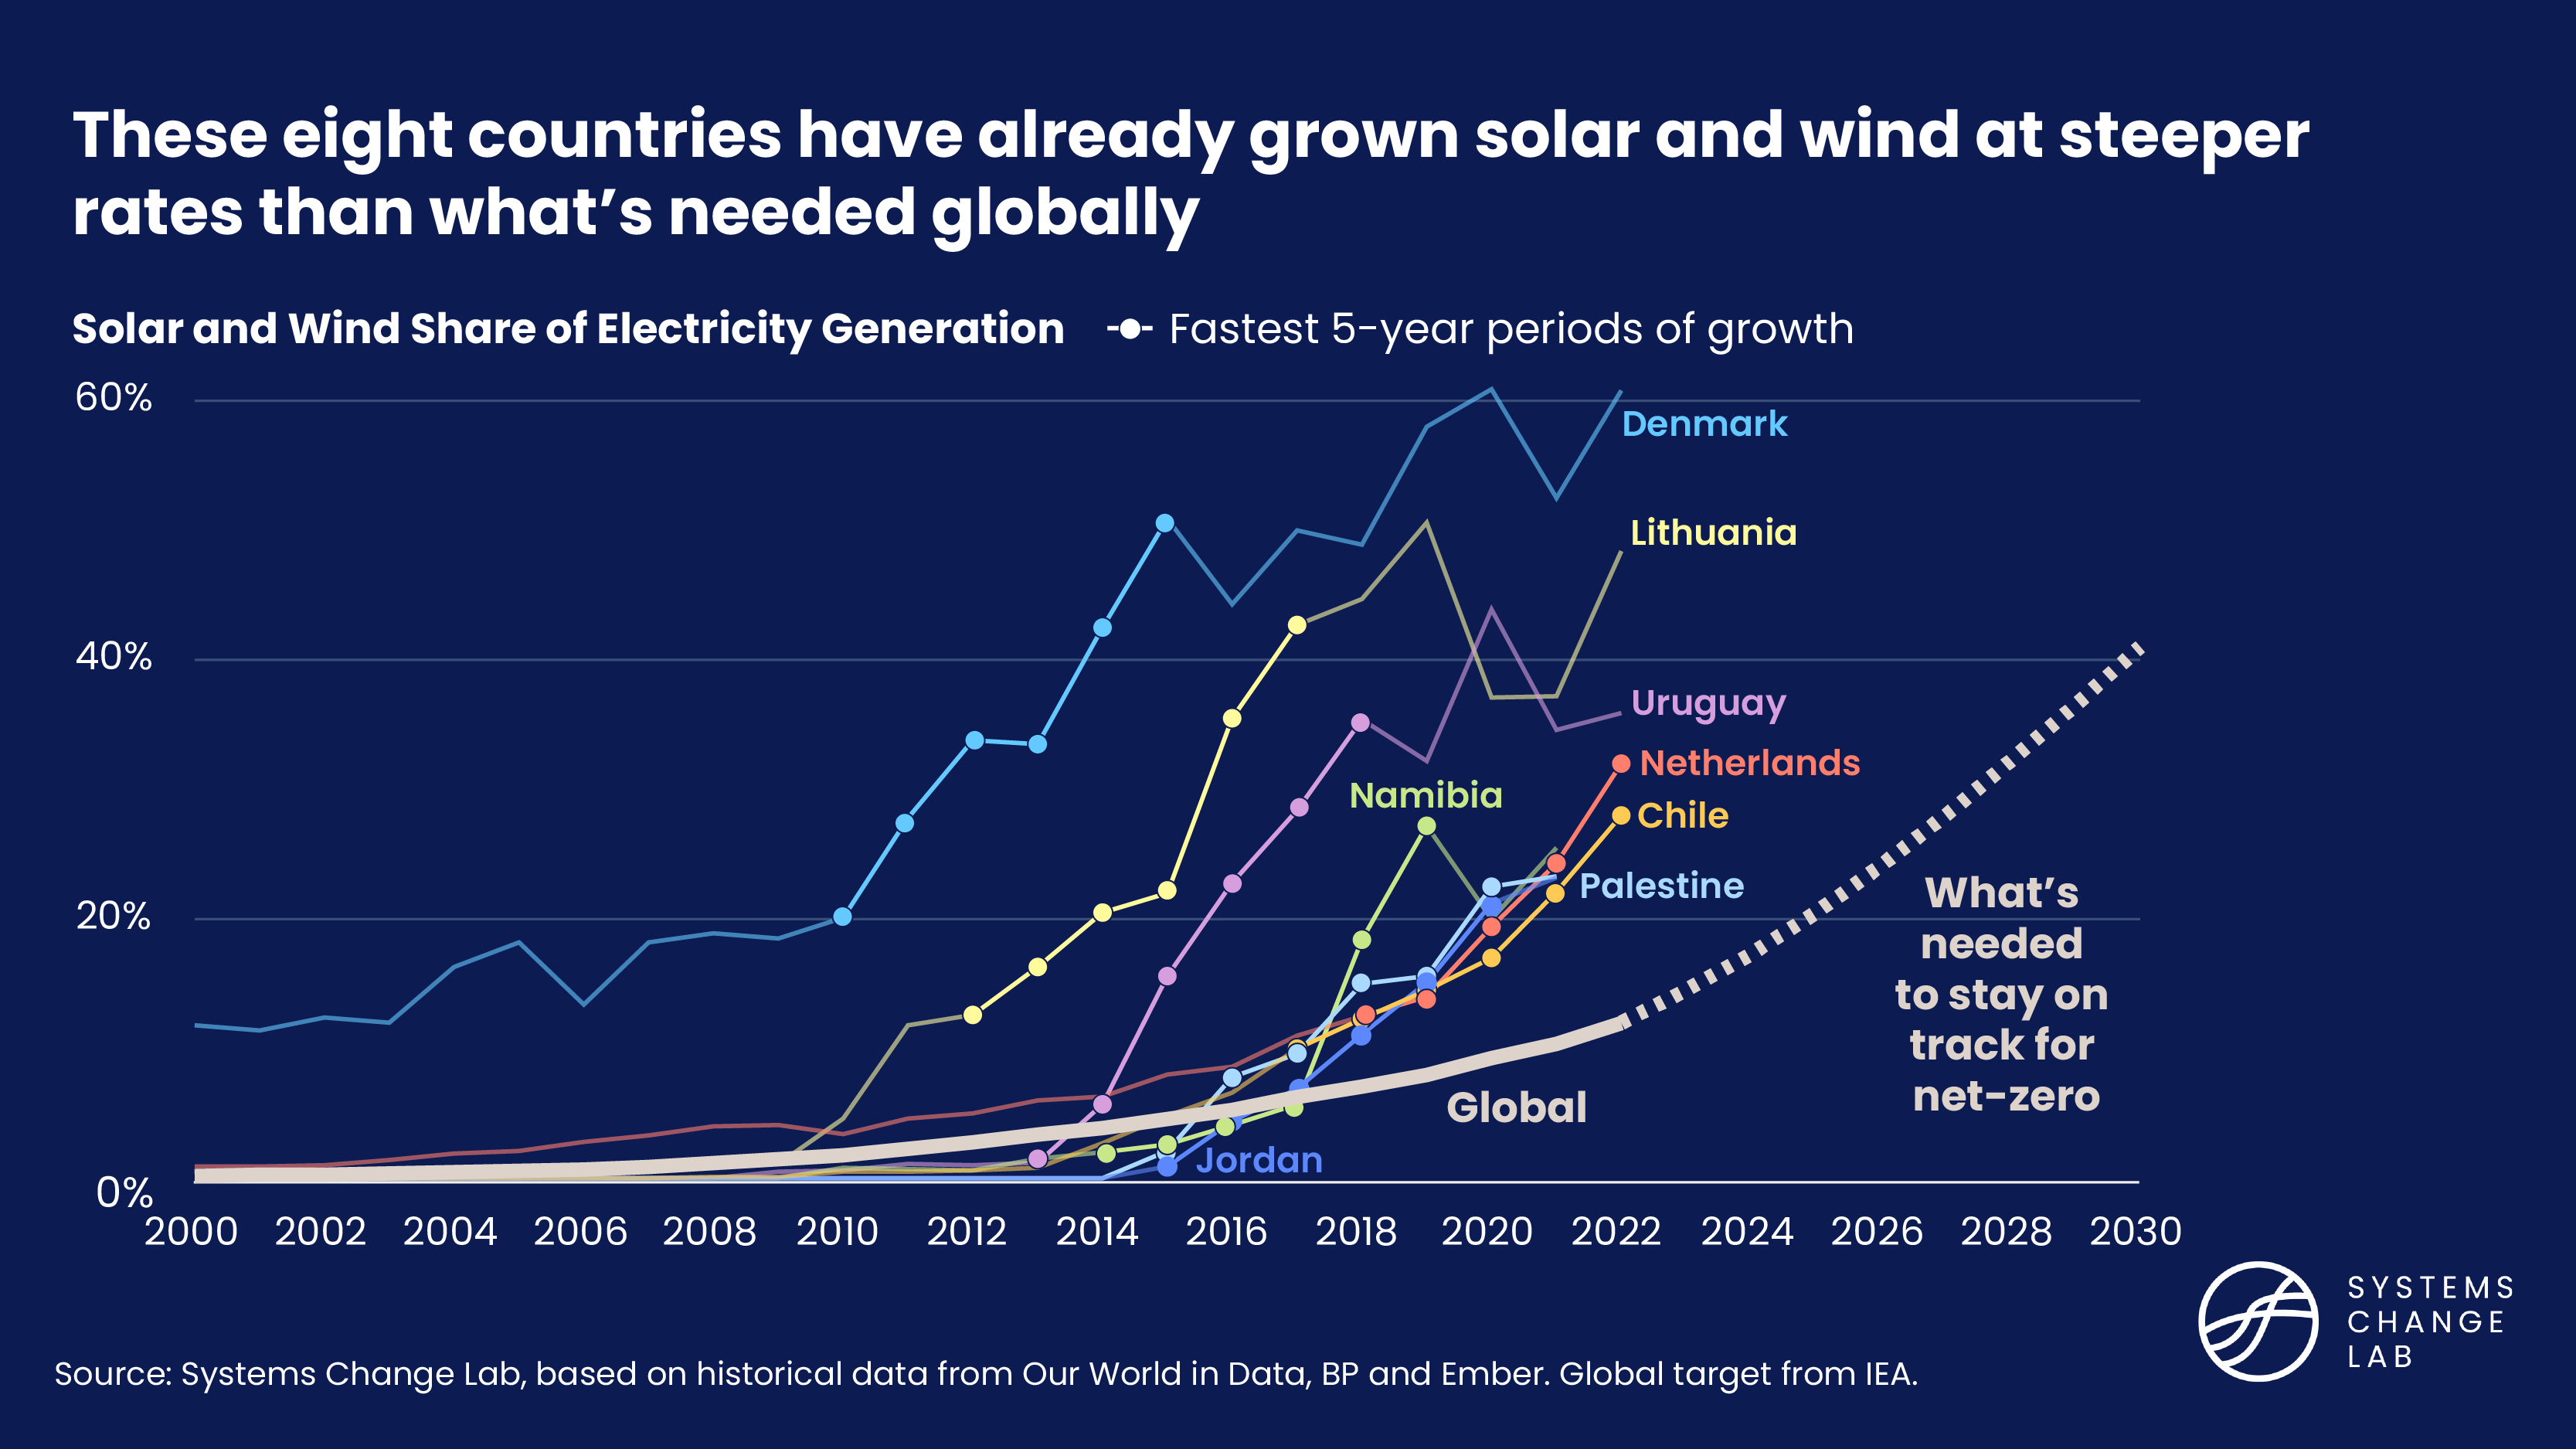 These eight countries have already grown solar and wind at steeper rates than what's needed globally